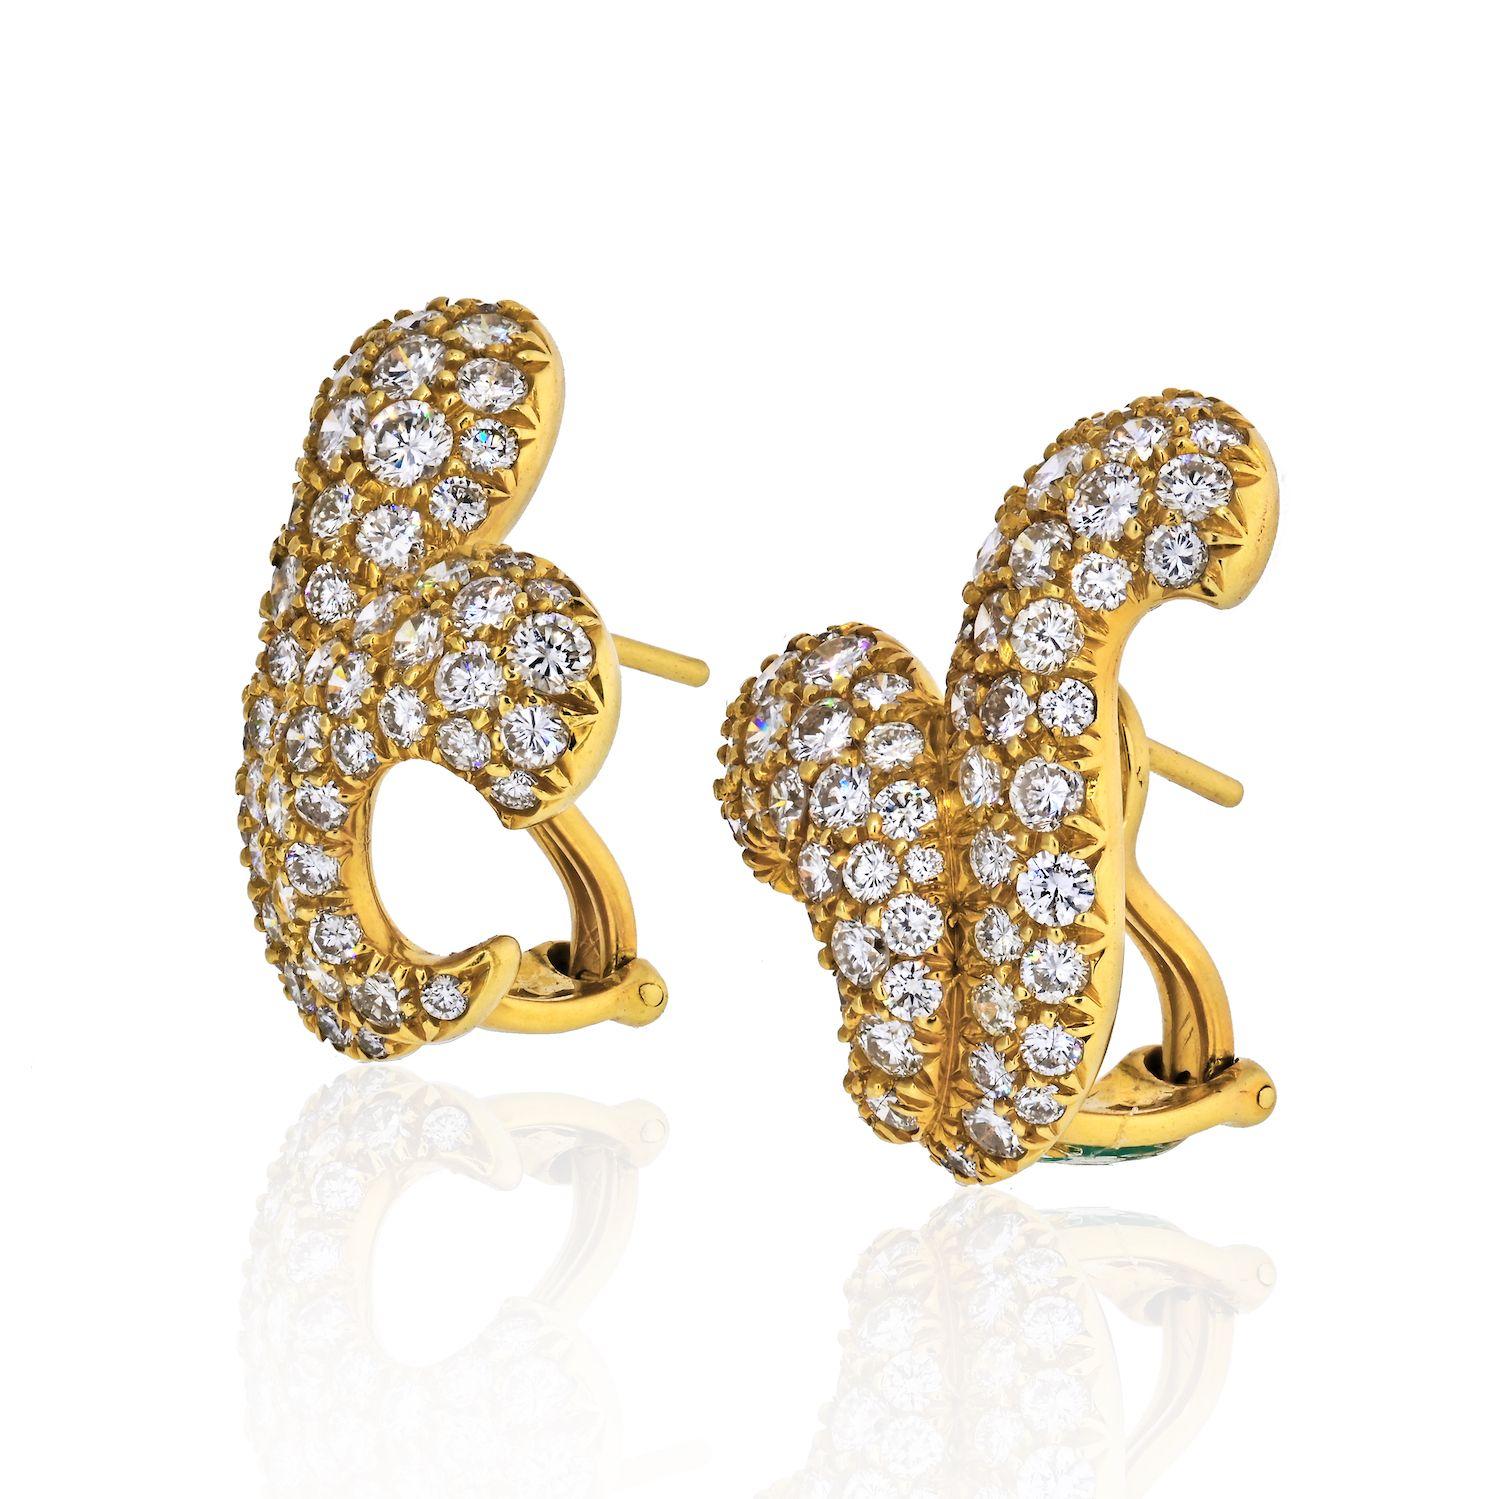 H. Stern Vintage 18K Yellow Gold 4.75 carat Pave Diamond Earrings. 
Completed by posts and omega clip backs.
Measures 24.6mm long.

*Note: earrings are designed for pierced ears, and are easily converted.